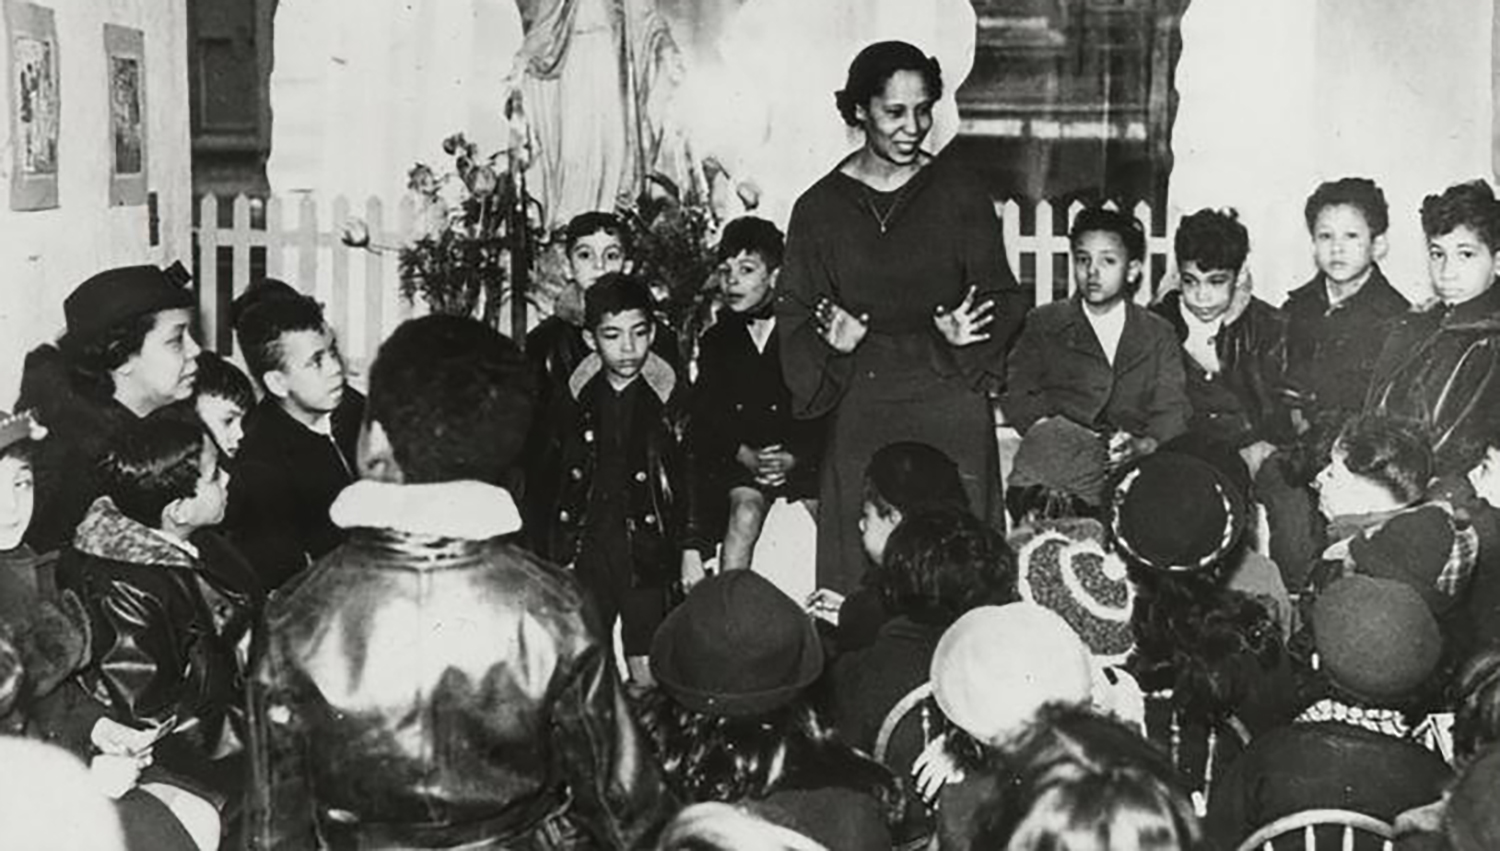 A young Pura Belpré speaks to a group of children.